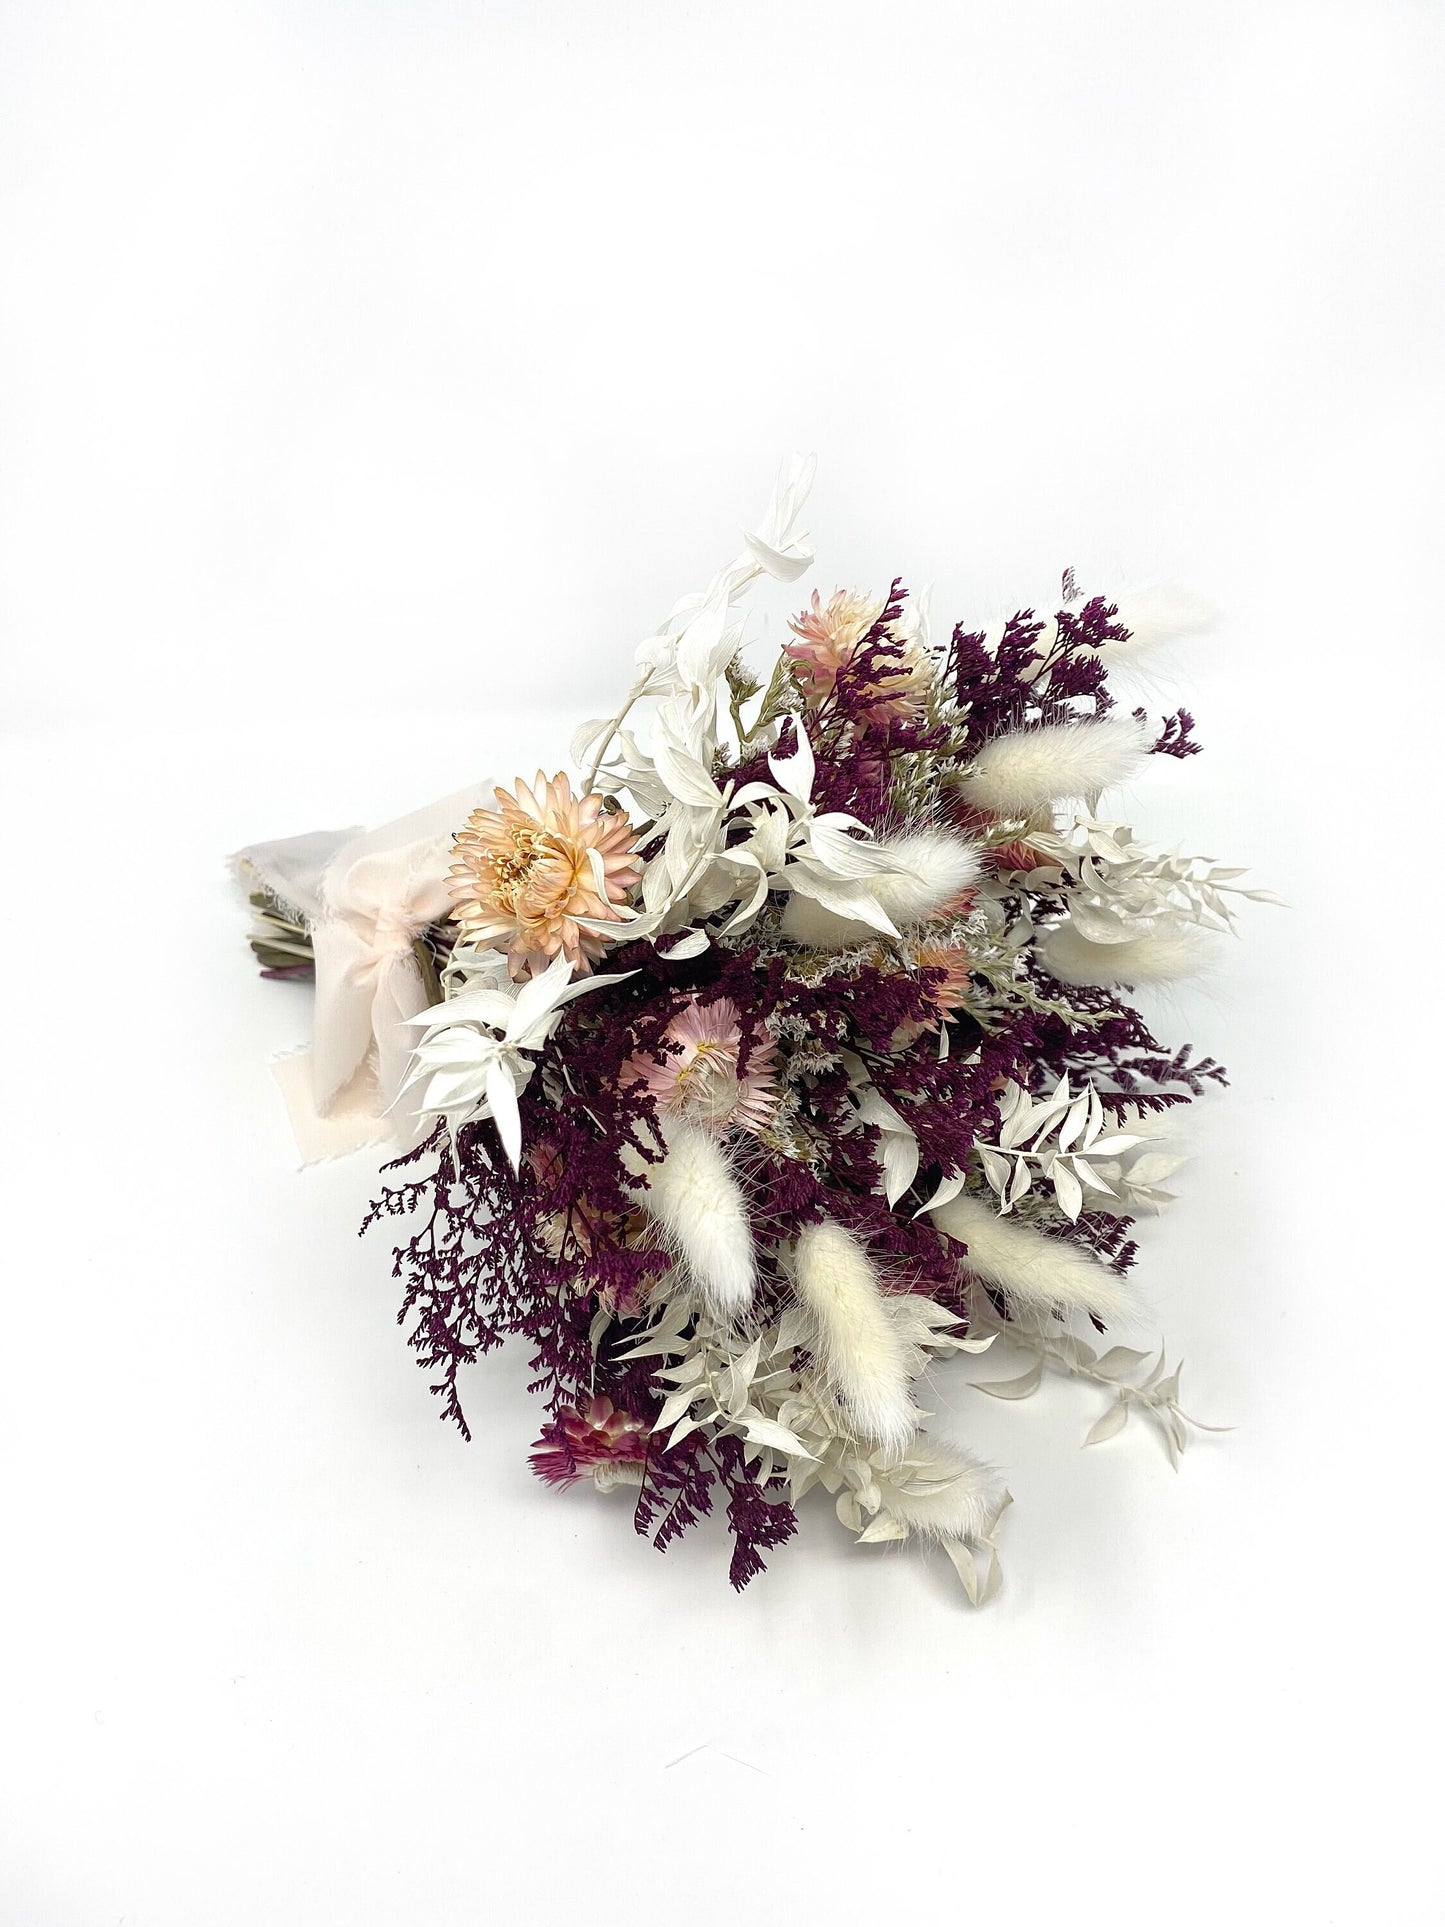 Wedding Bouquet, Dried Flowers, Preserved Floral, Rustic, Bunny Tails, Bridal, Strawflowers, Throw Bouquet, Spring, Pink, Purple, White